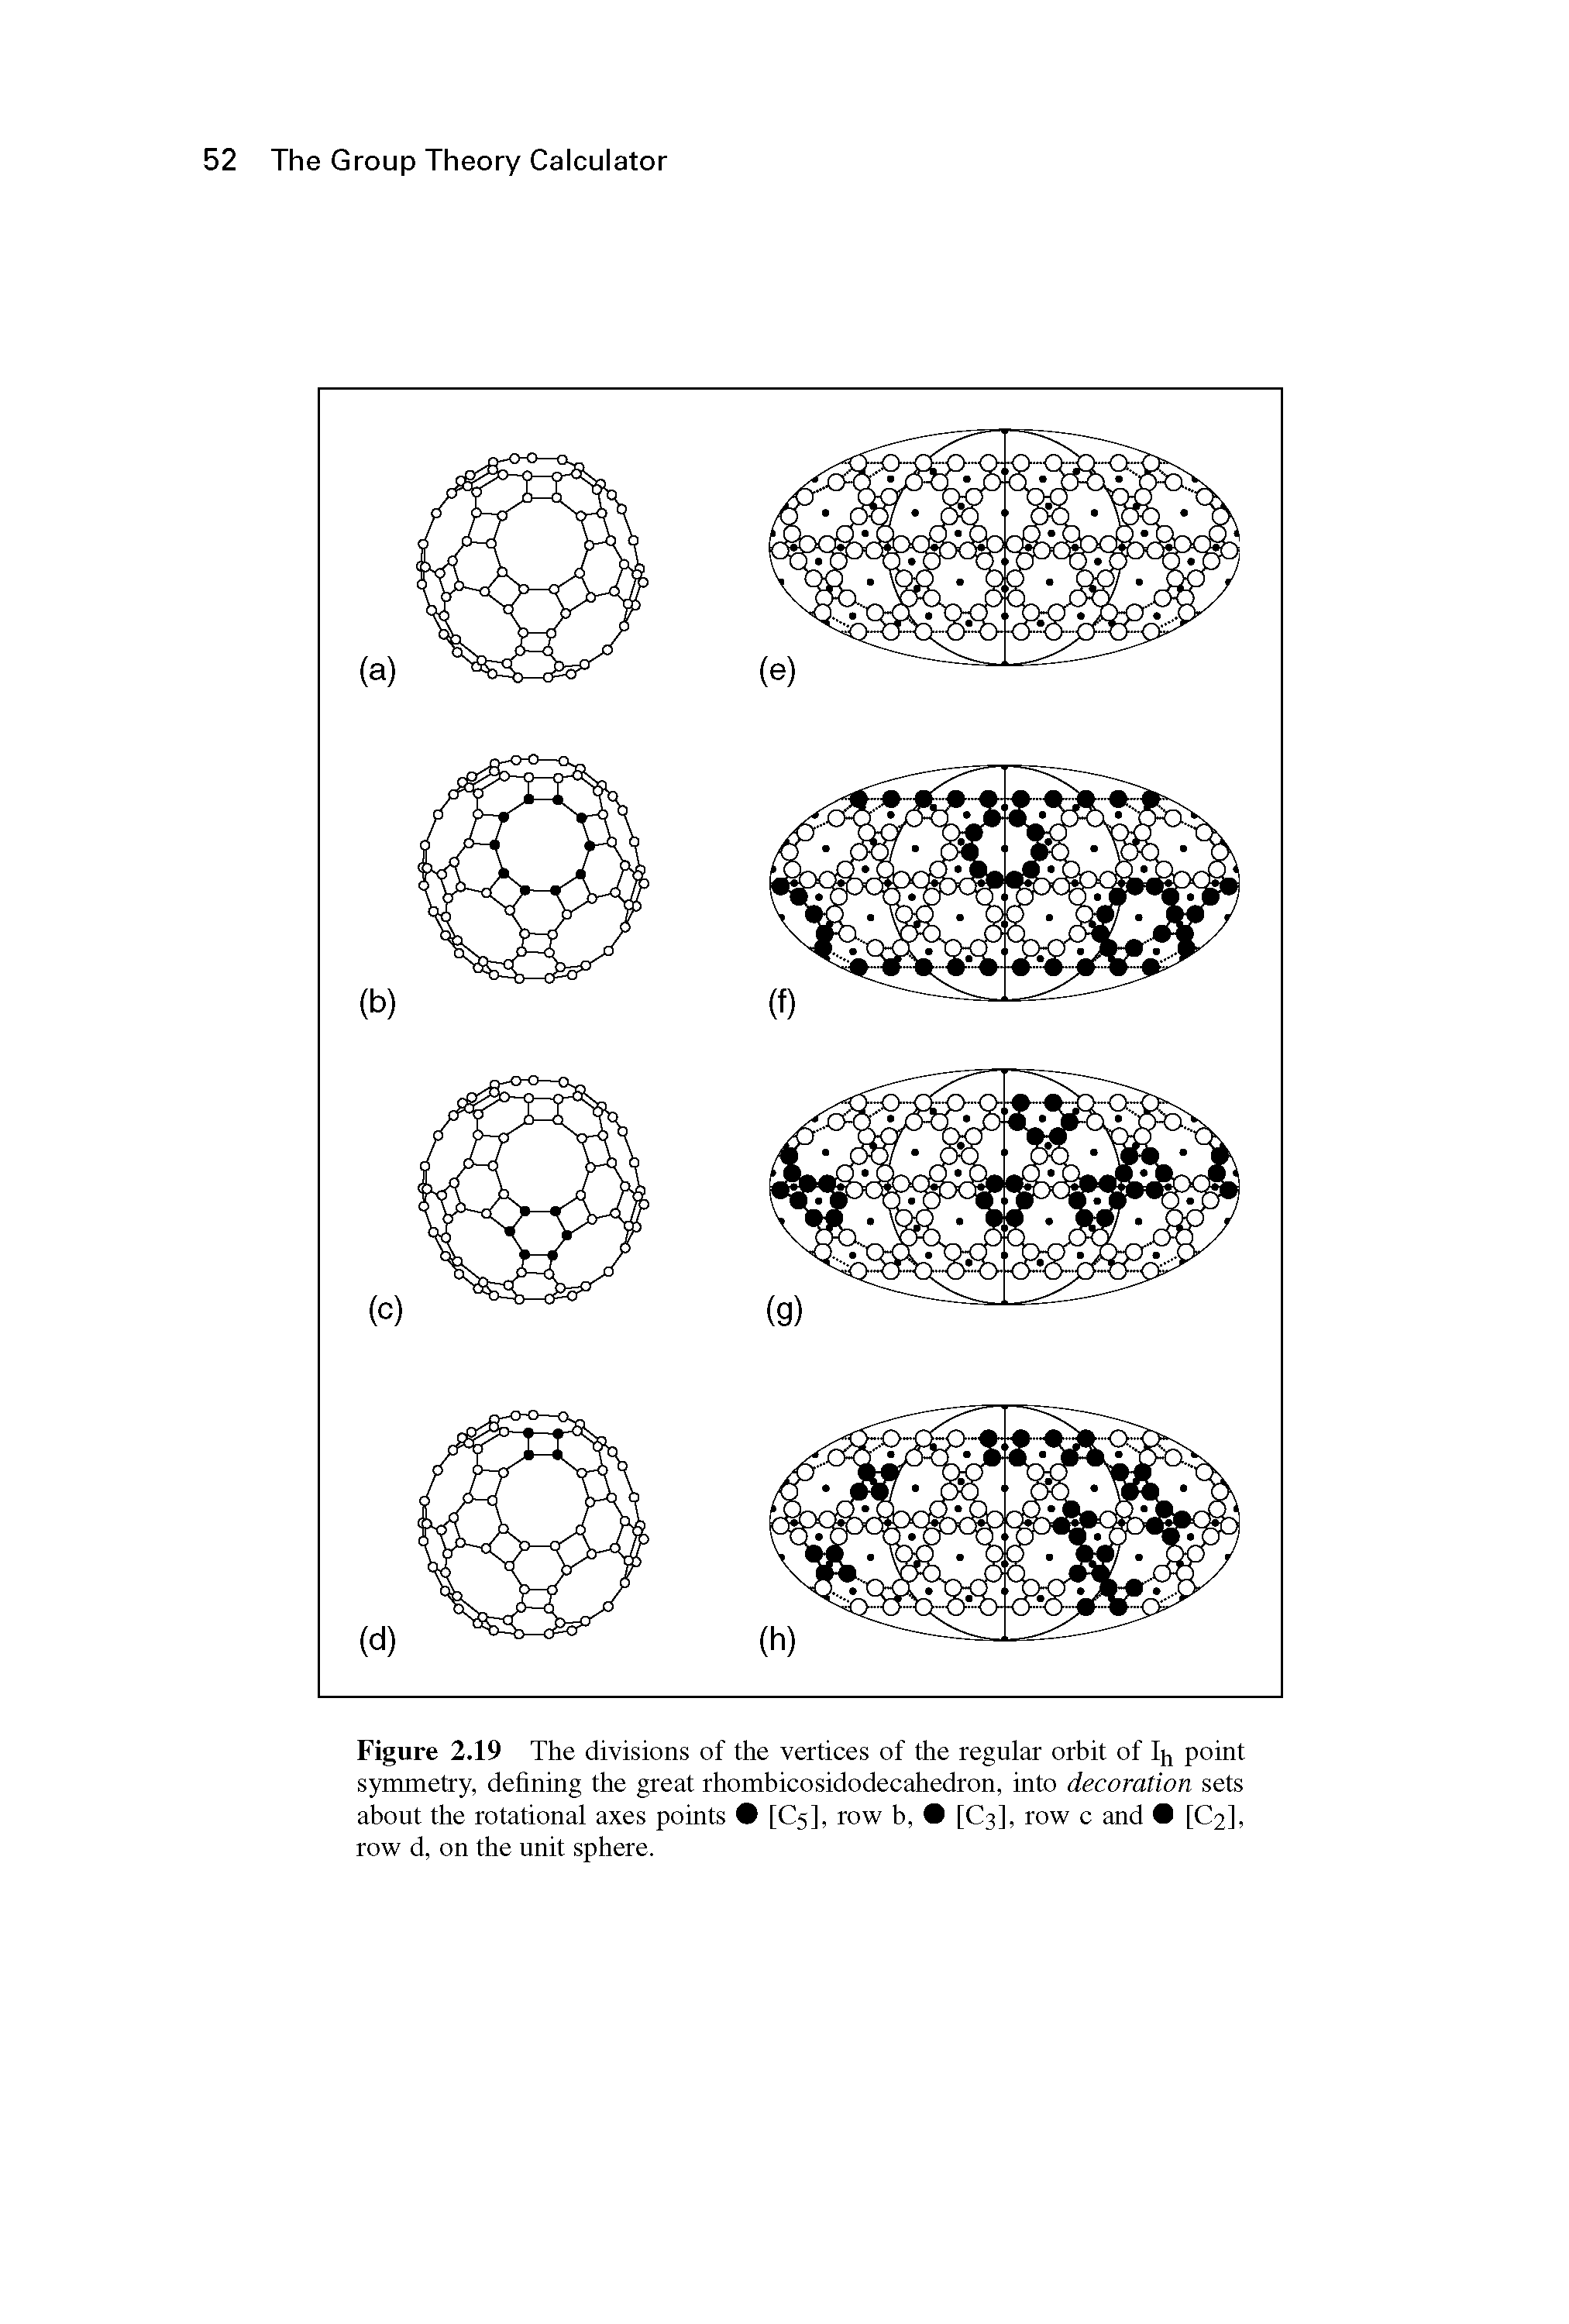 Figure 2.19 The divisions of the vertices of the regular orbit of point symmetry, defining the great rhombicosidodecahedron, into decoration sets about the rotational axes points [C5], row b, [C3], row c and [C2], row d, on the unit sphere.